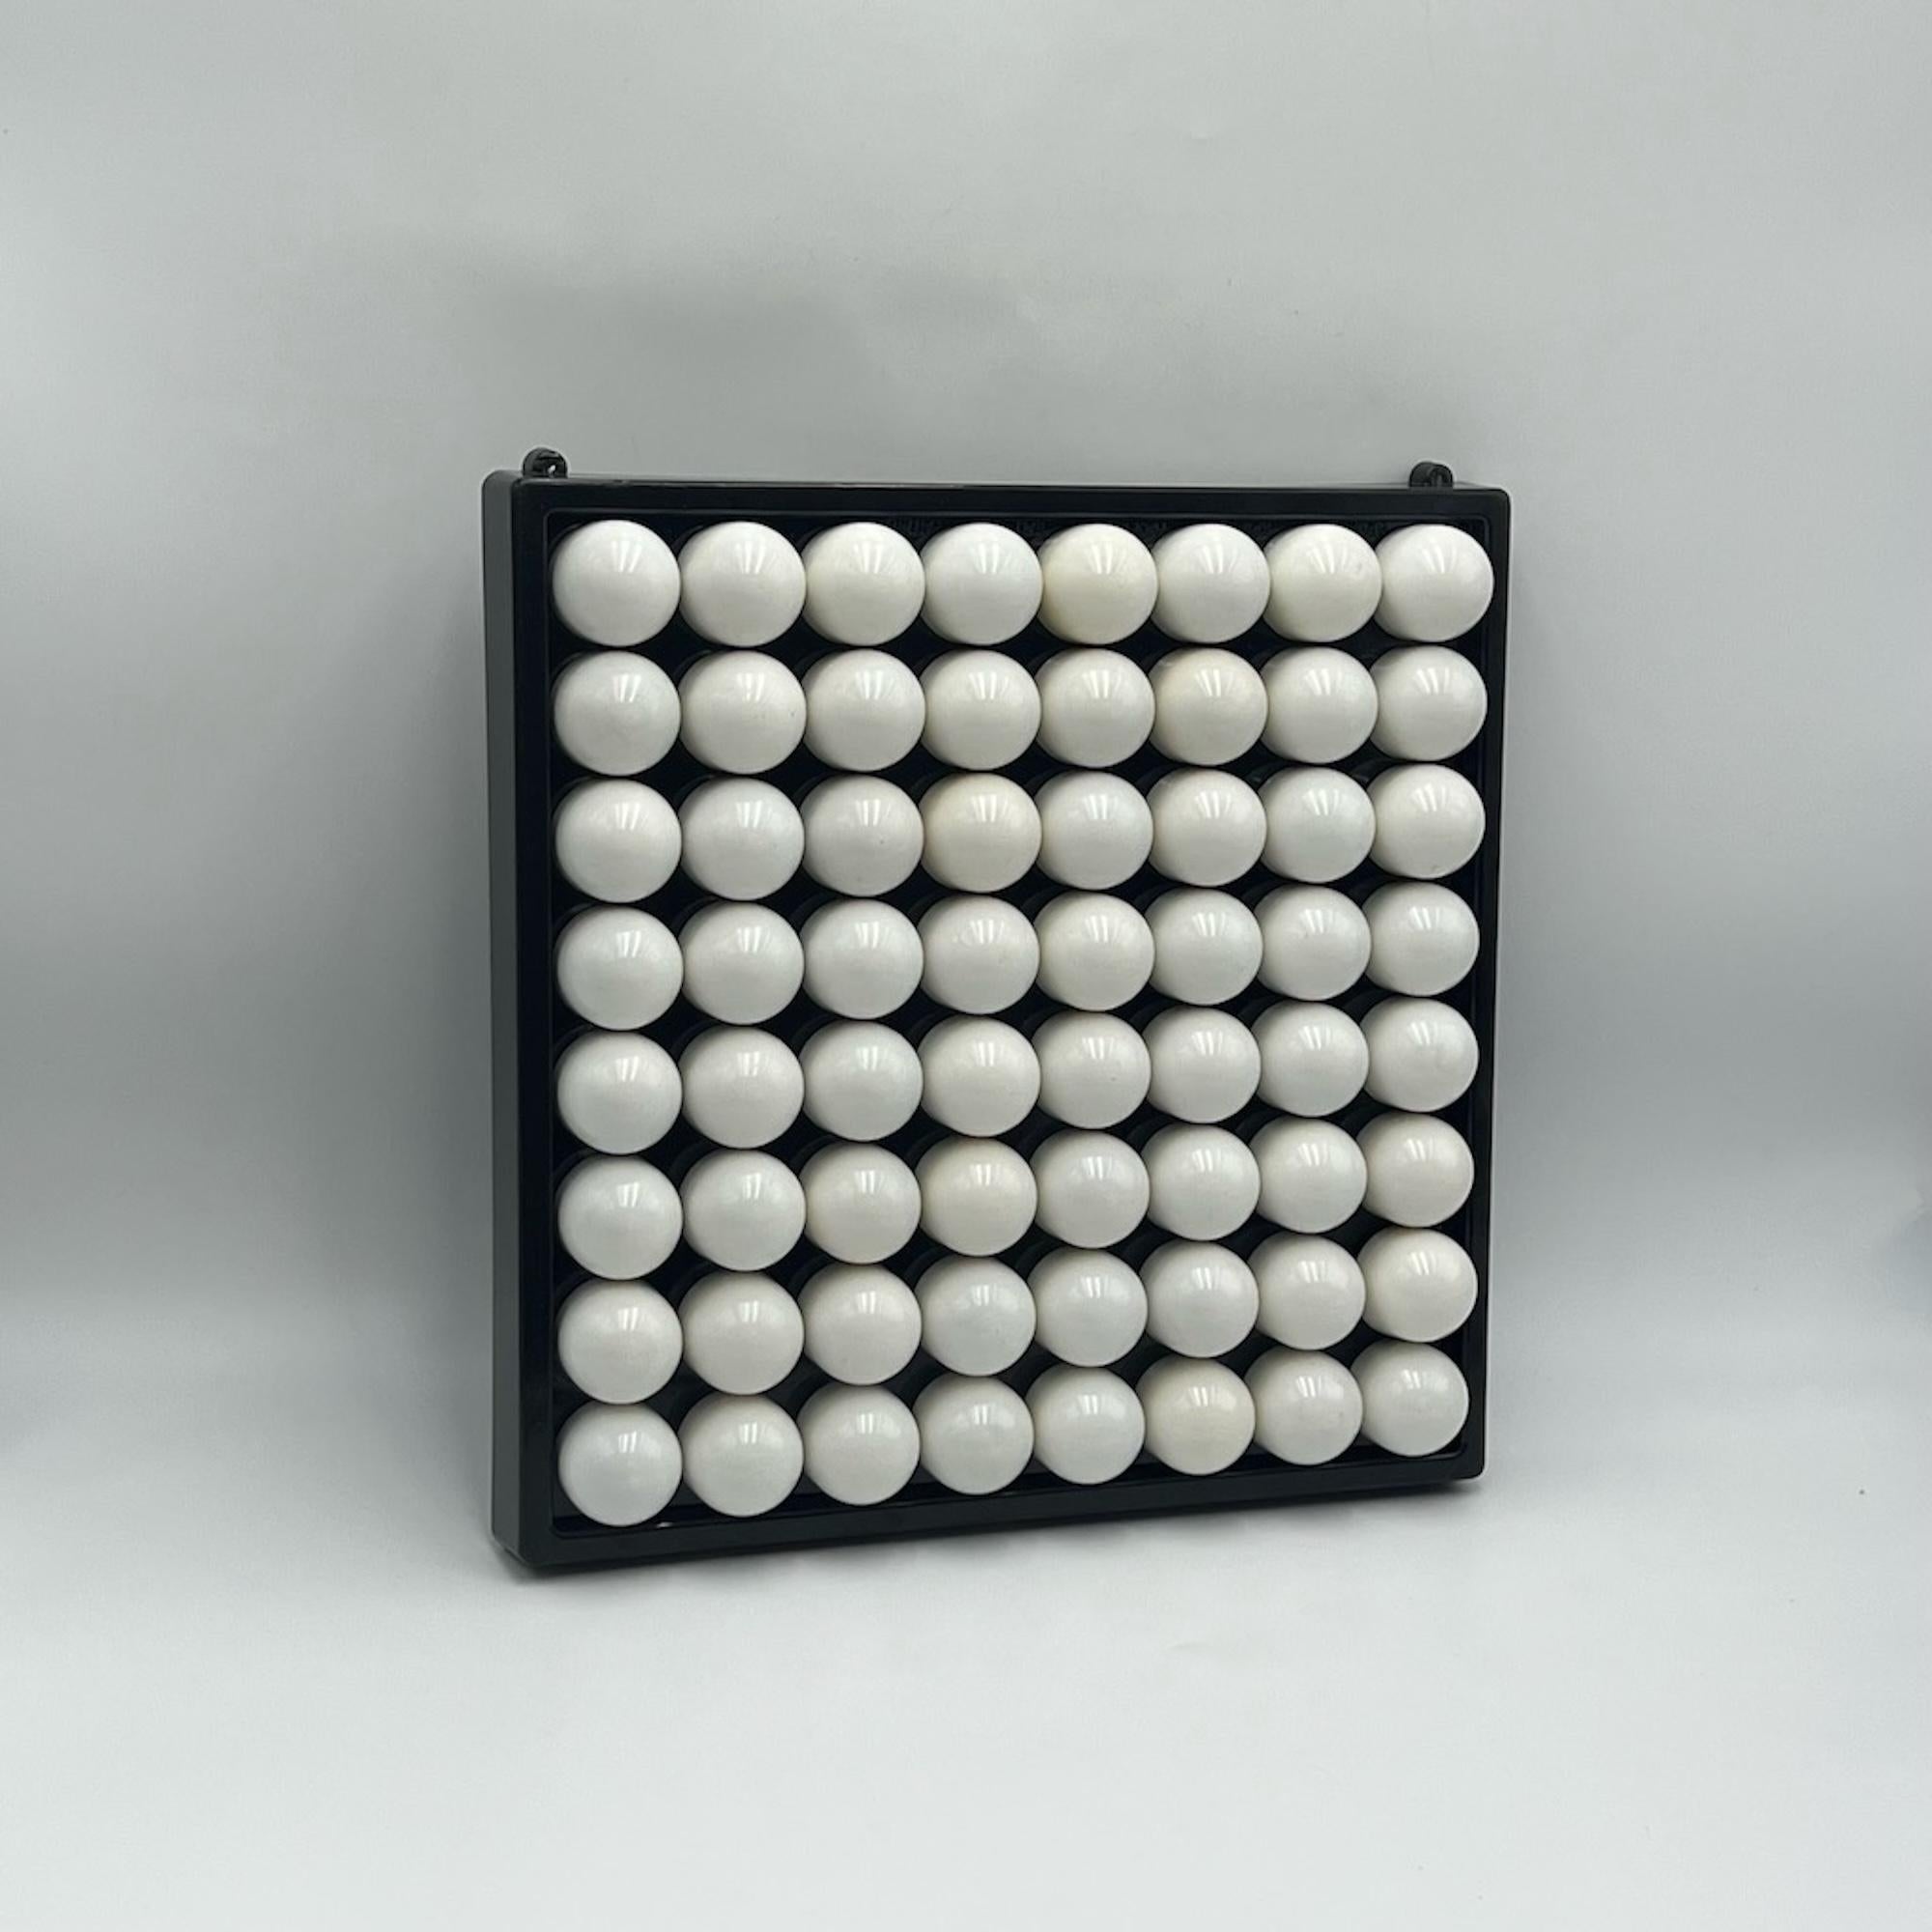 Unfindable wall calendar 'Wall Ball' made in Italy by Euroway Torino the 70s. A statement piece for those who appreciate the charm of space age era.

The “Wall Ball” square perpetual calendar made by Euroway Torino in the 1970s is a captivating and